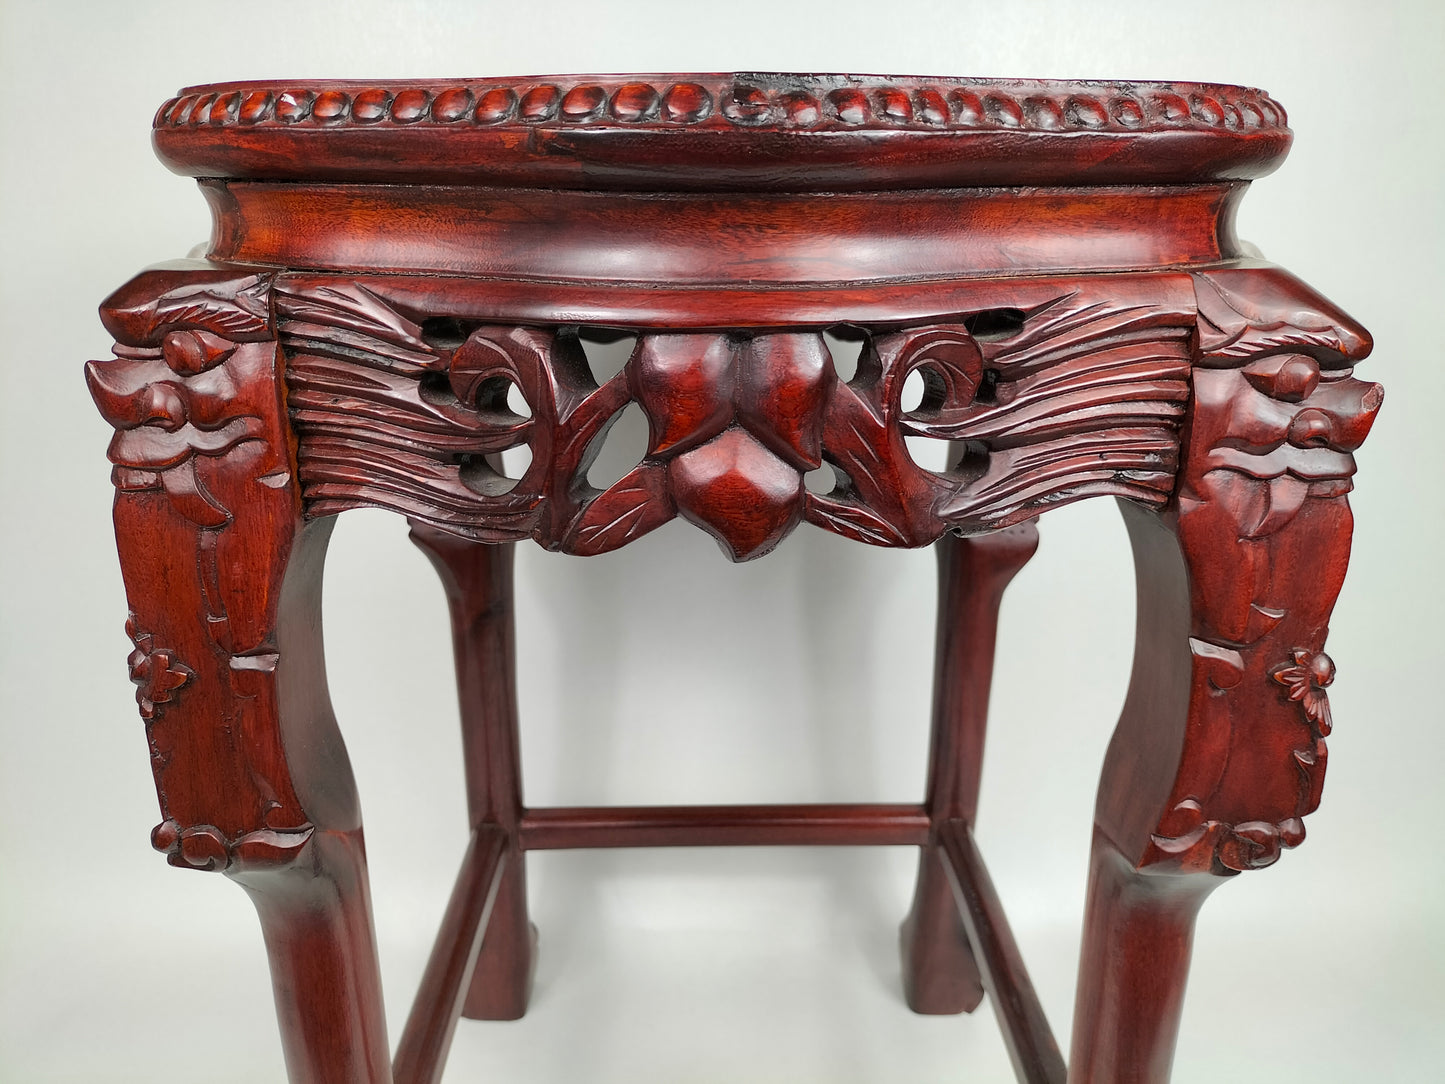 Chinese wooden side table inlaid with a marble top // Rosewood - 20th century